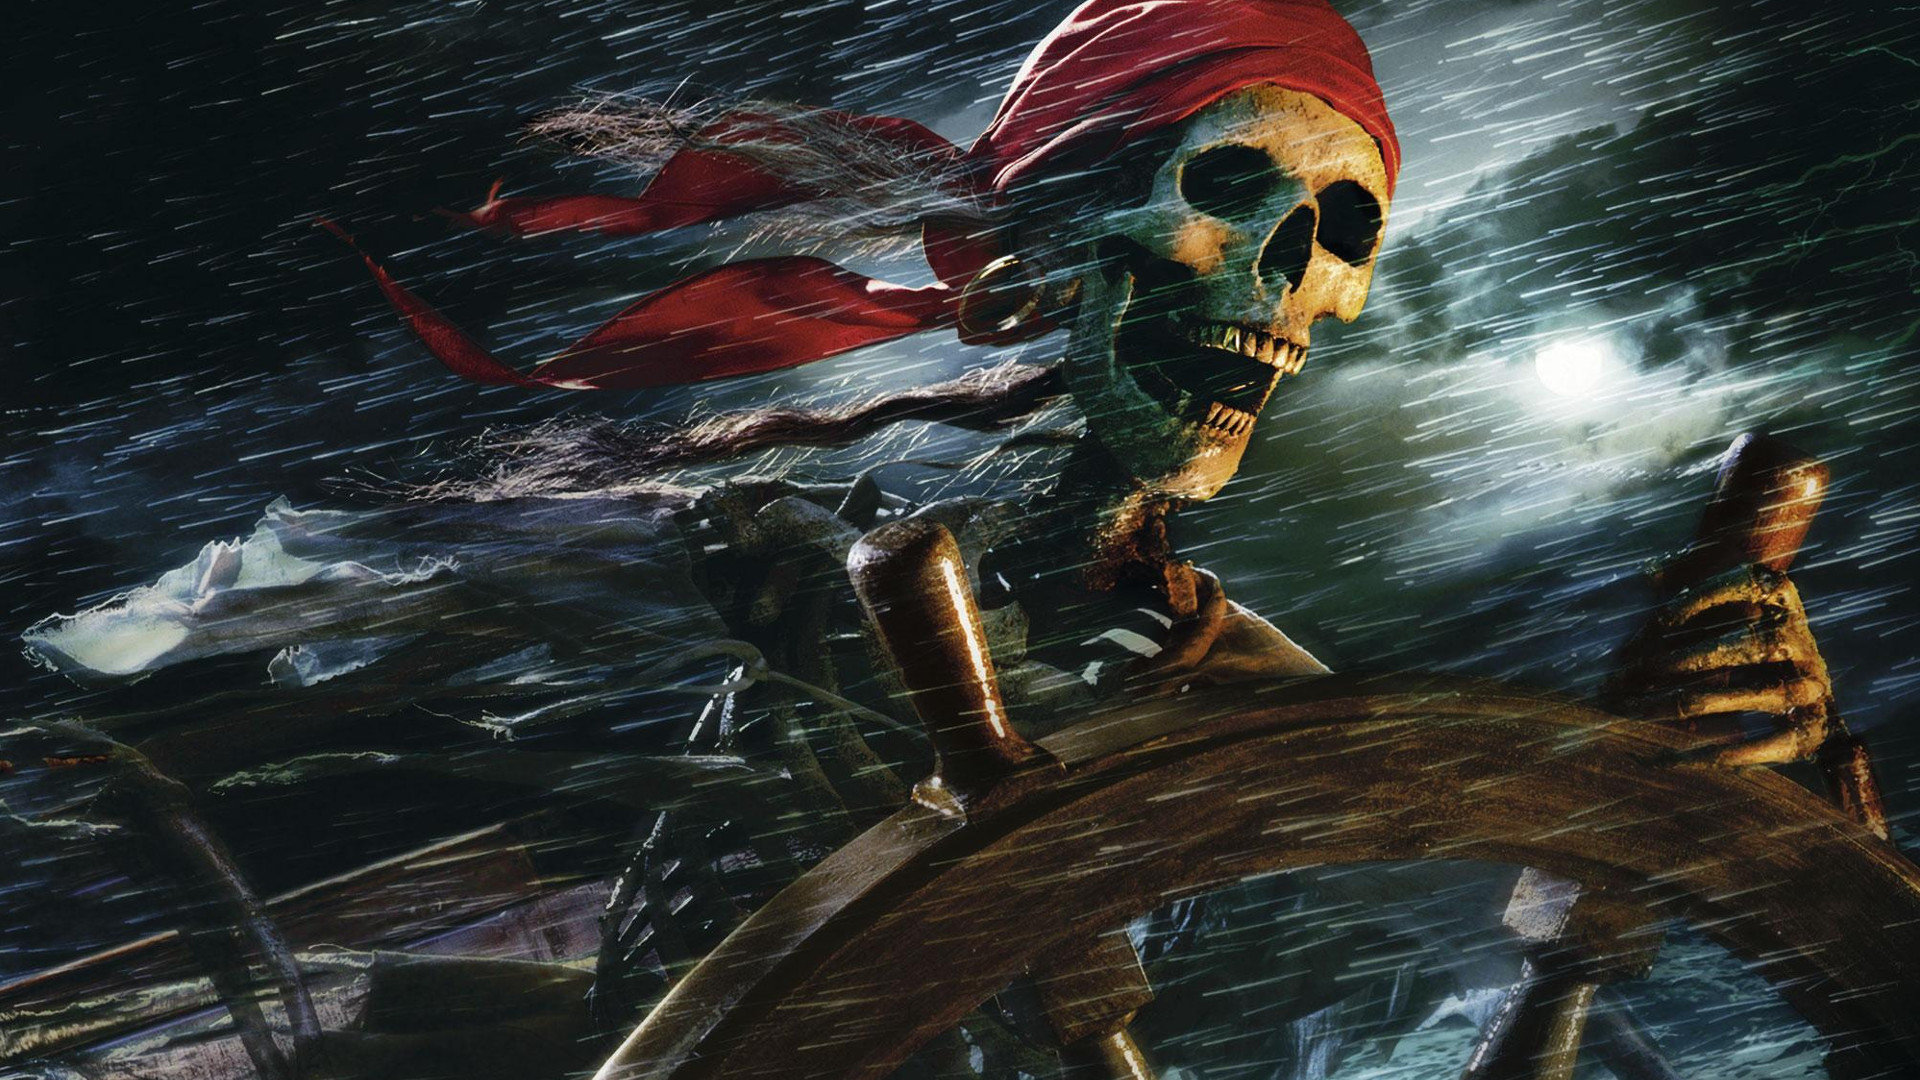 Pirates Of The Caribbean Wallpapers 1920x1080 Full Hd 1080p